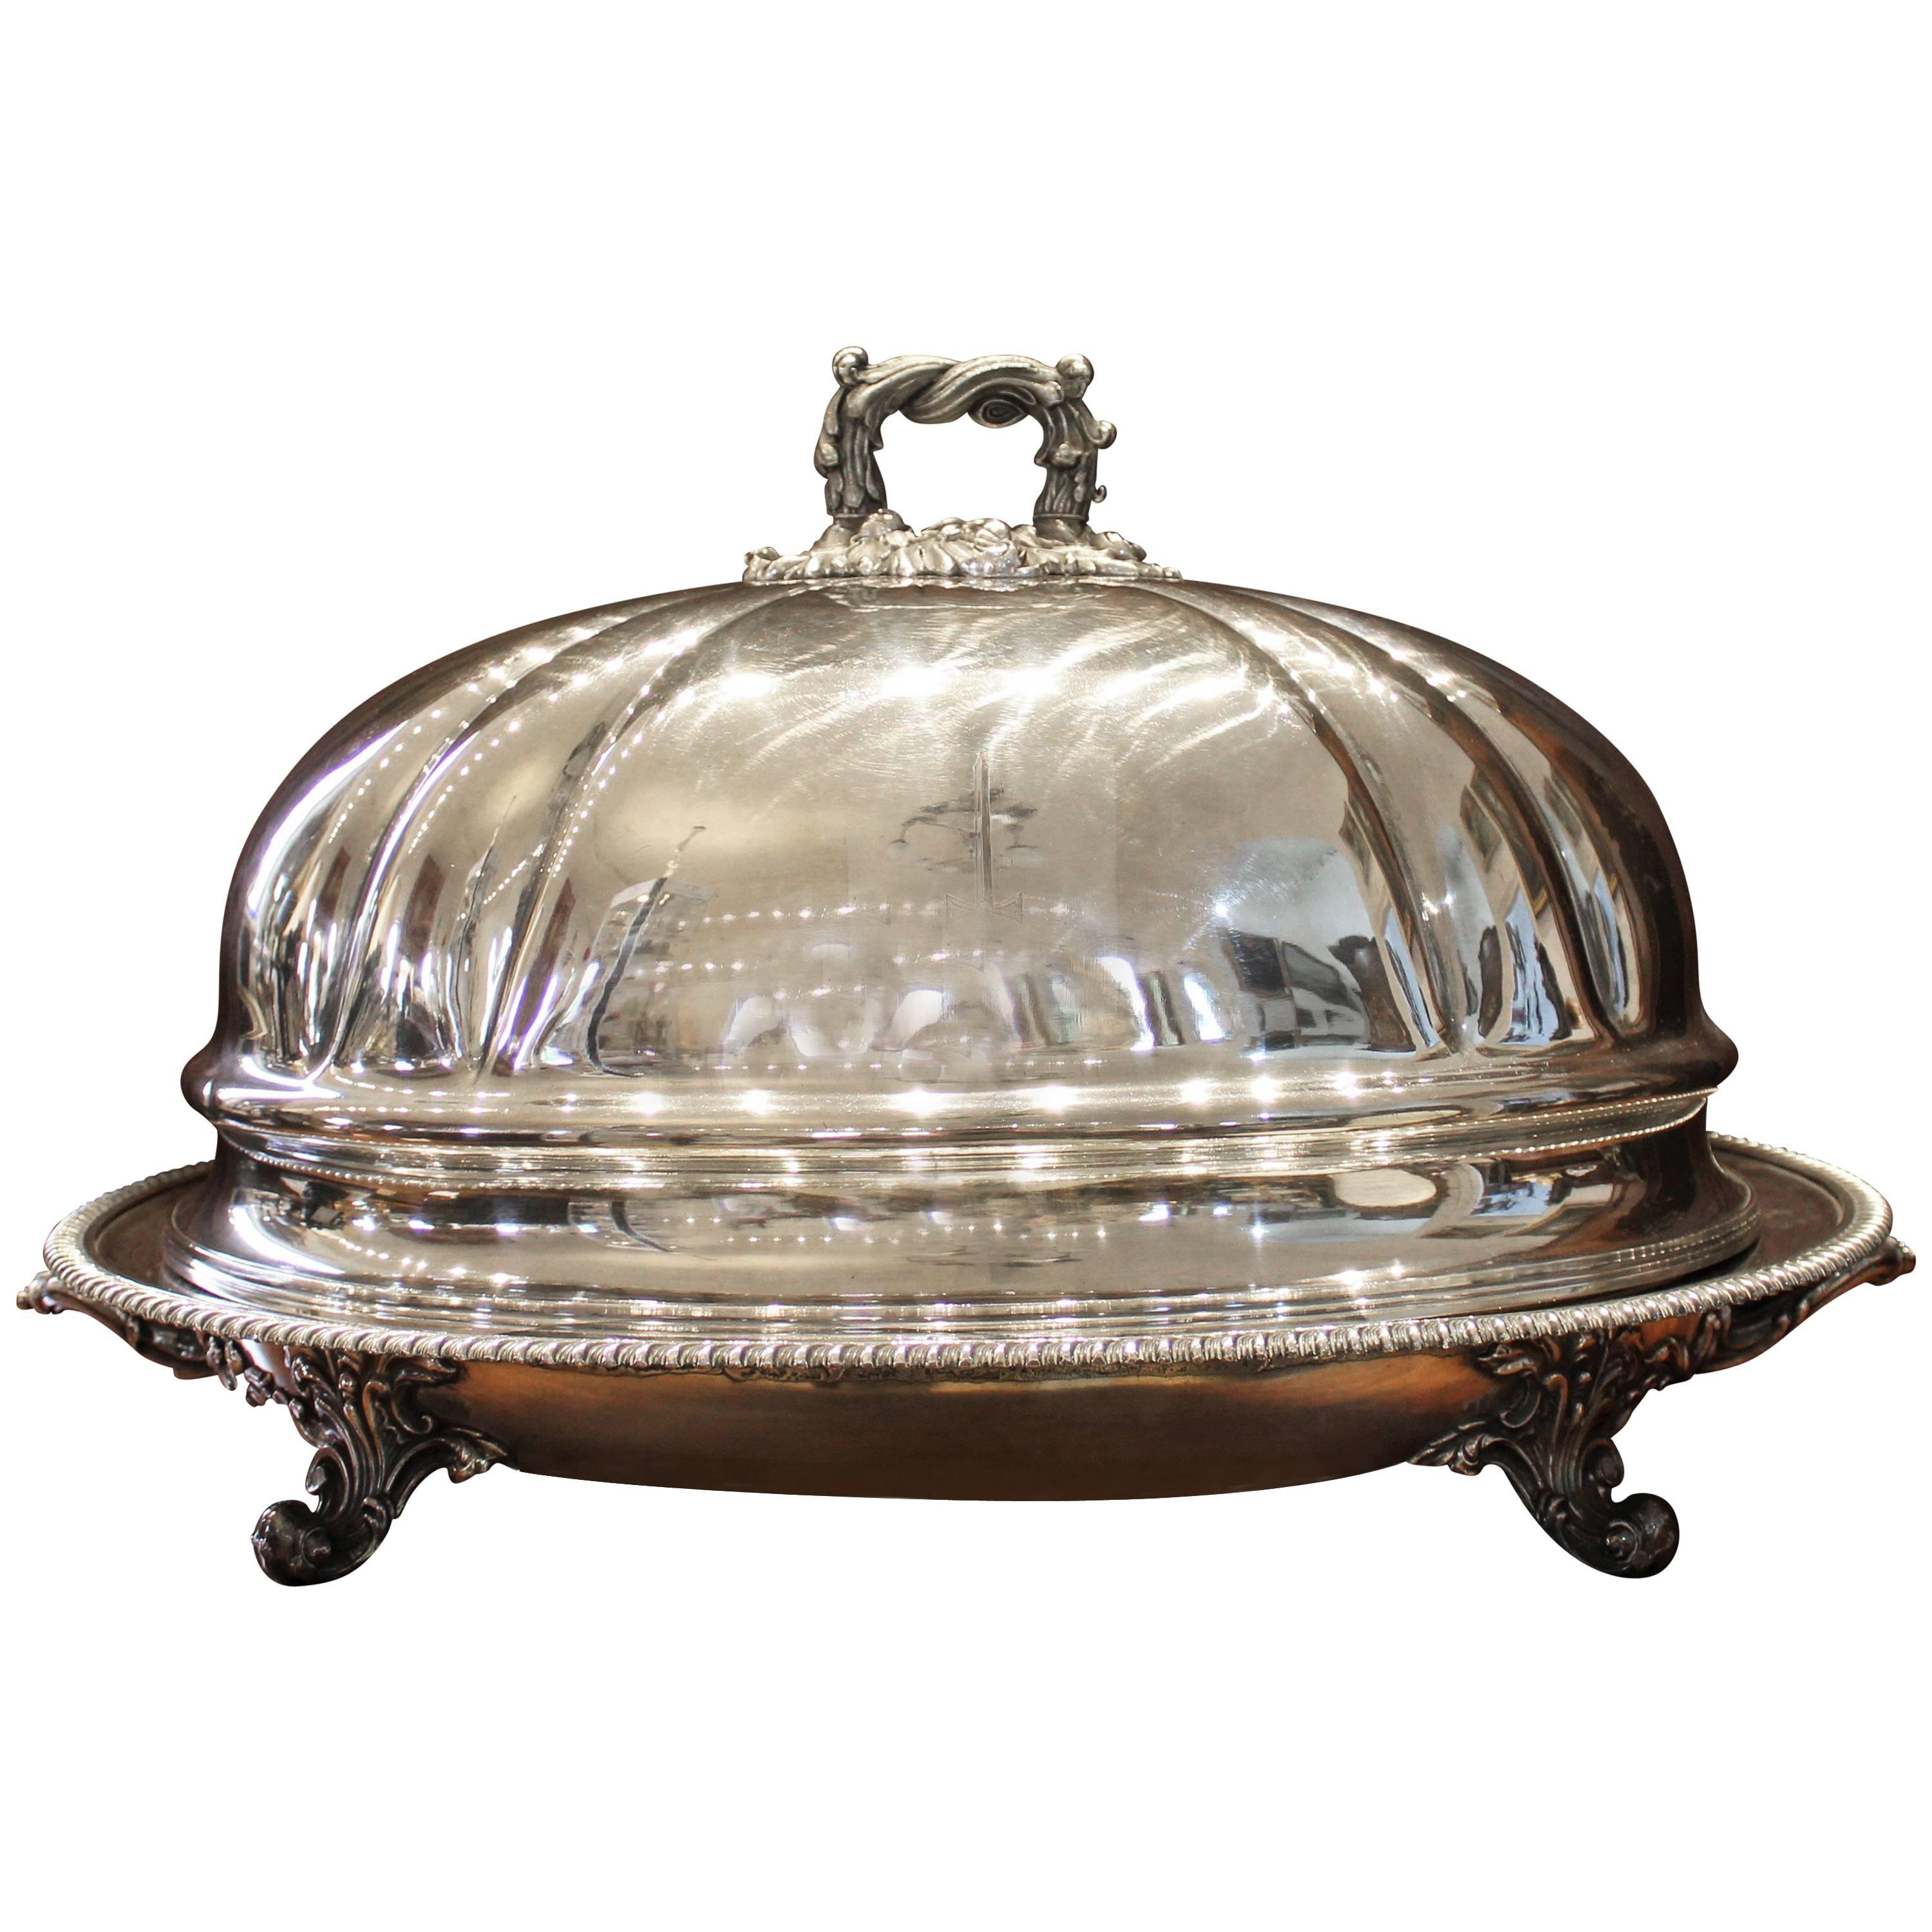 Georgian Sheffield Silverplated Meat Tray with Domed Lid by T&J Creswick